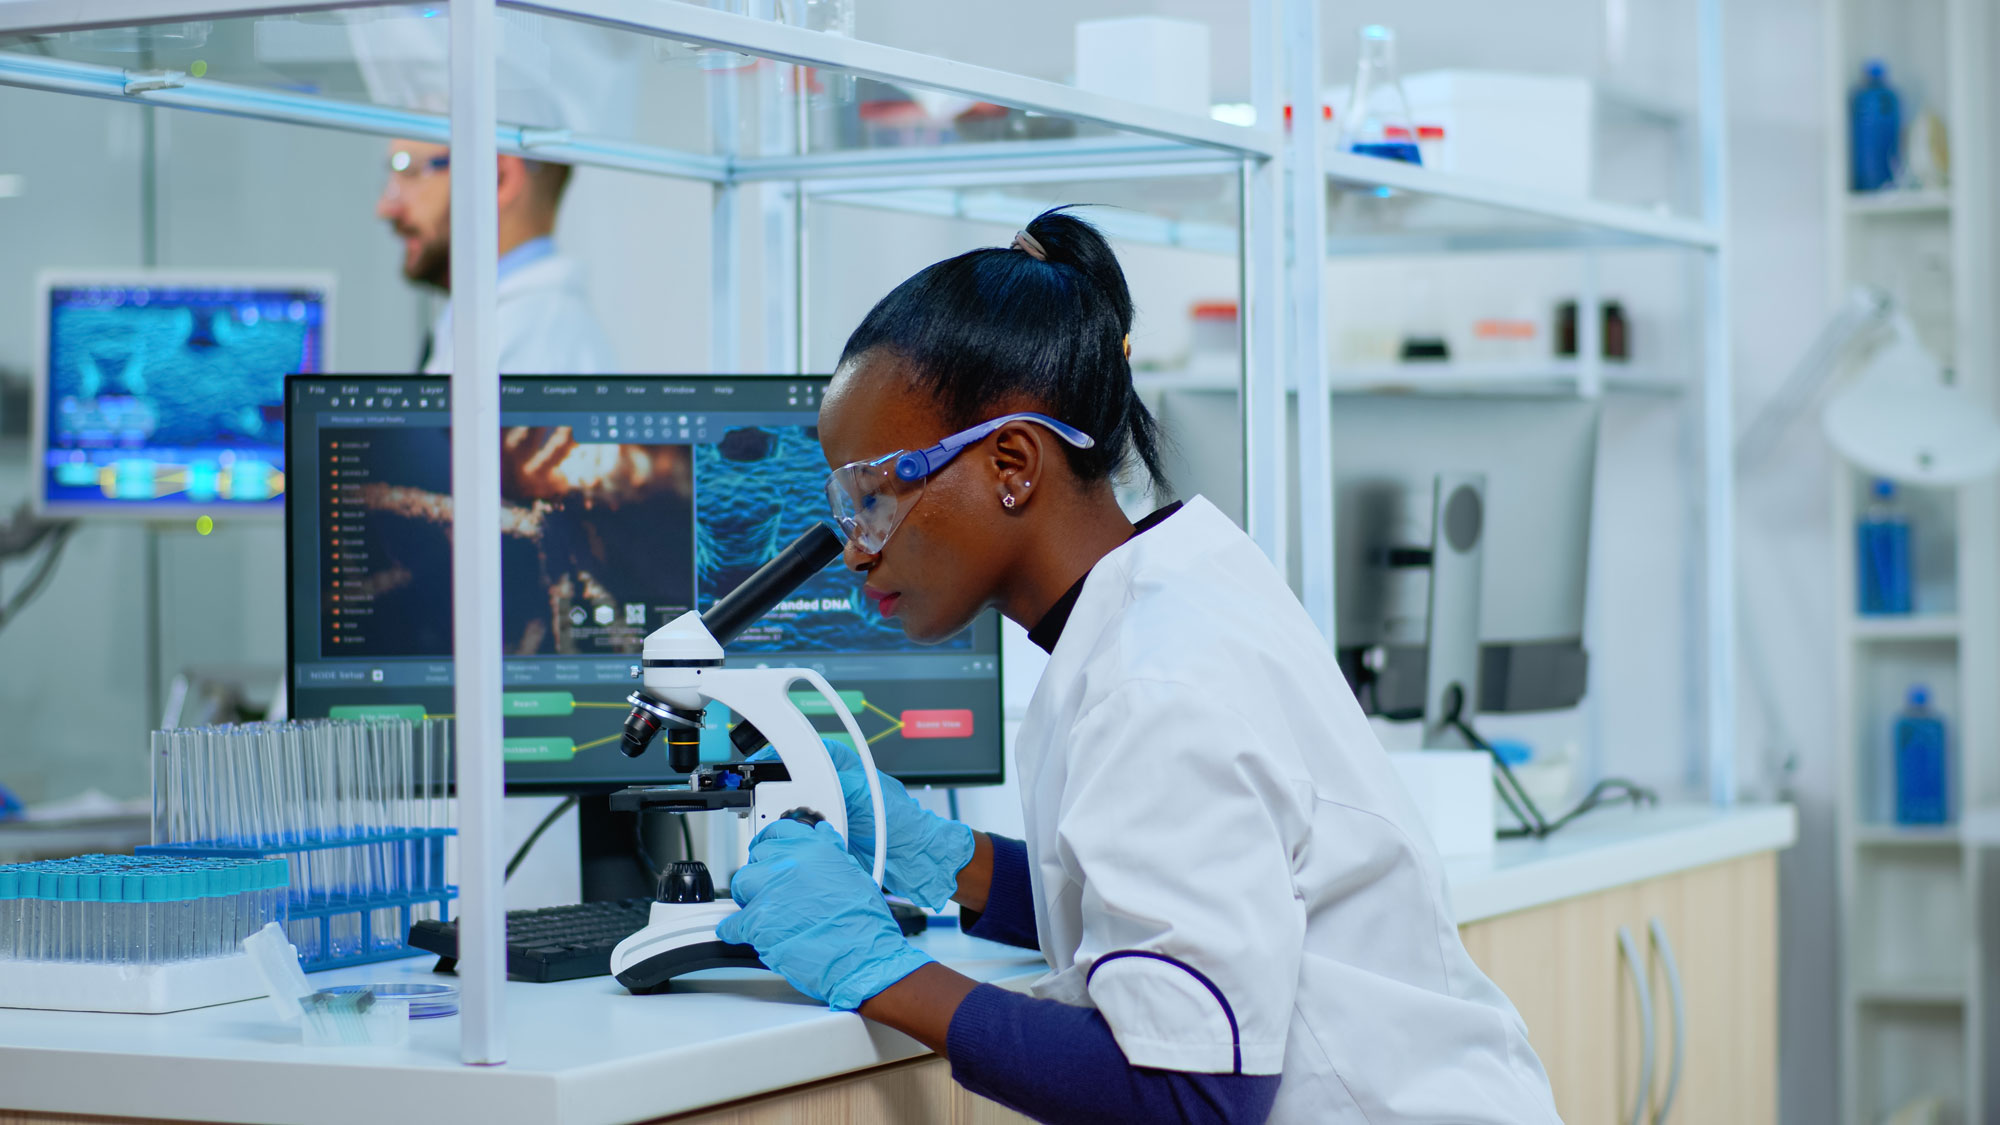 A scientist looks through a microscope in a laboratory. The slide she is observing is magnified on the monitor beside her